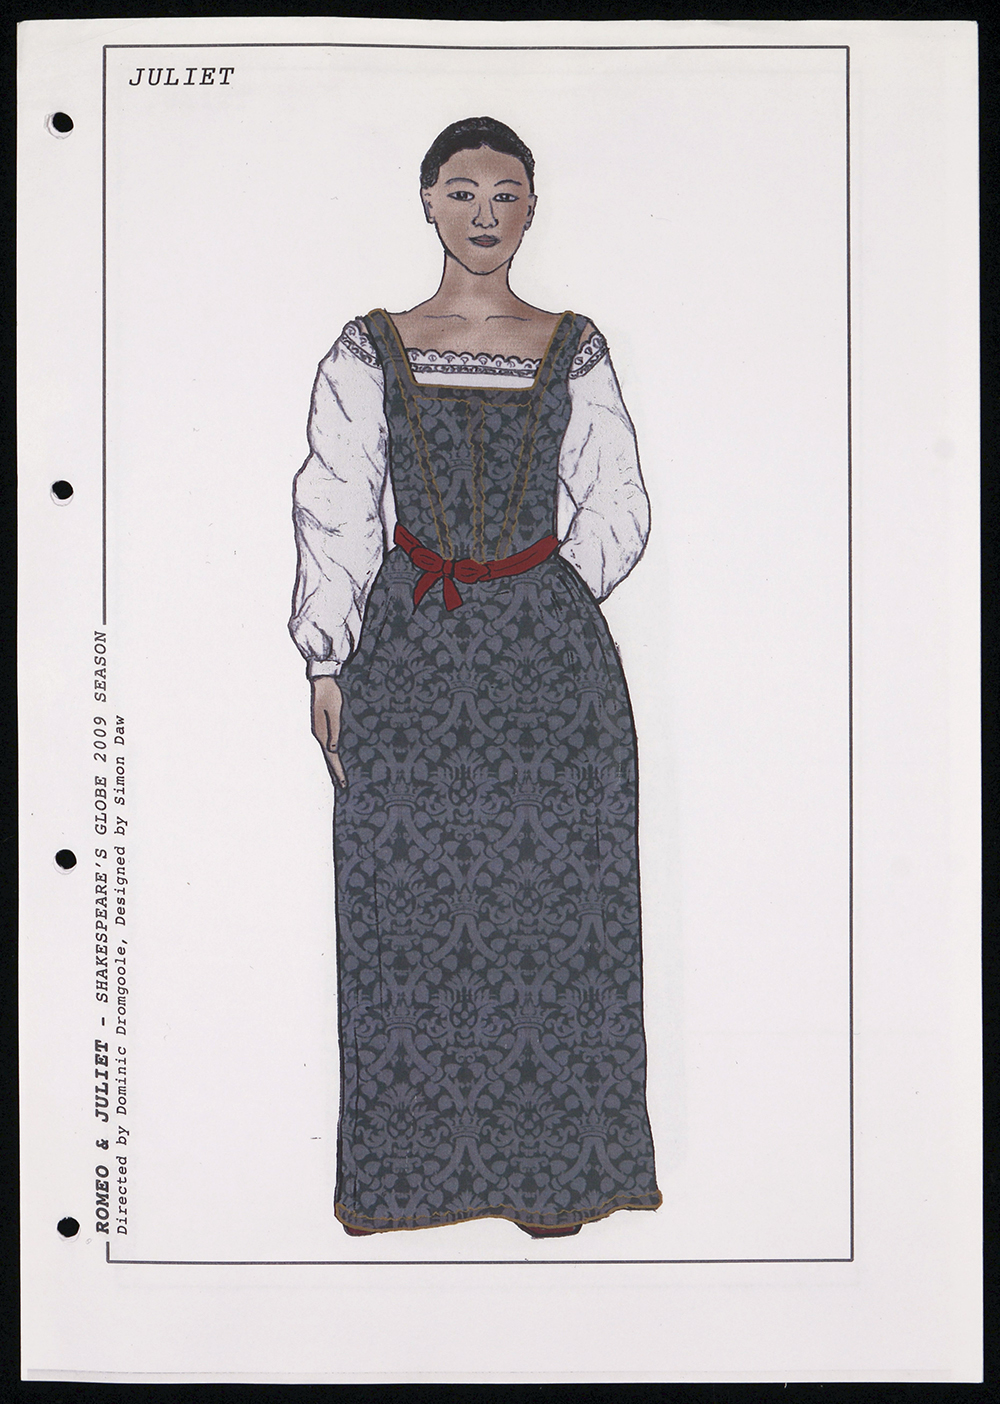 A costume sketch for Juliet, with a blue corset dress.